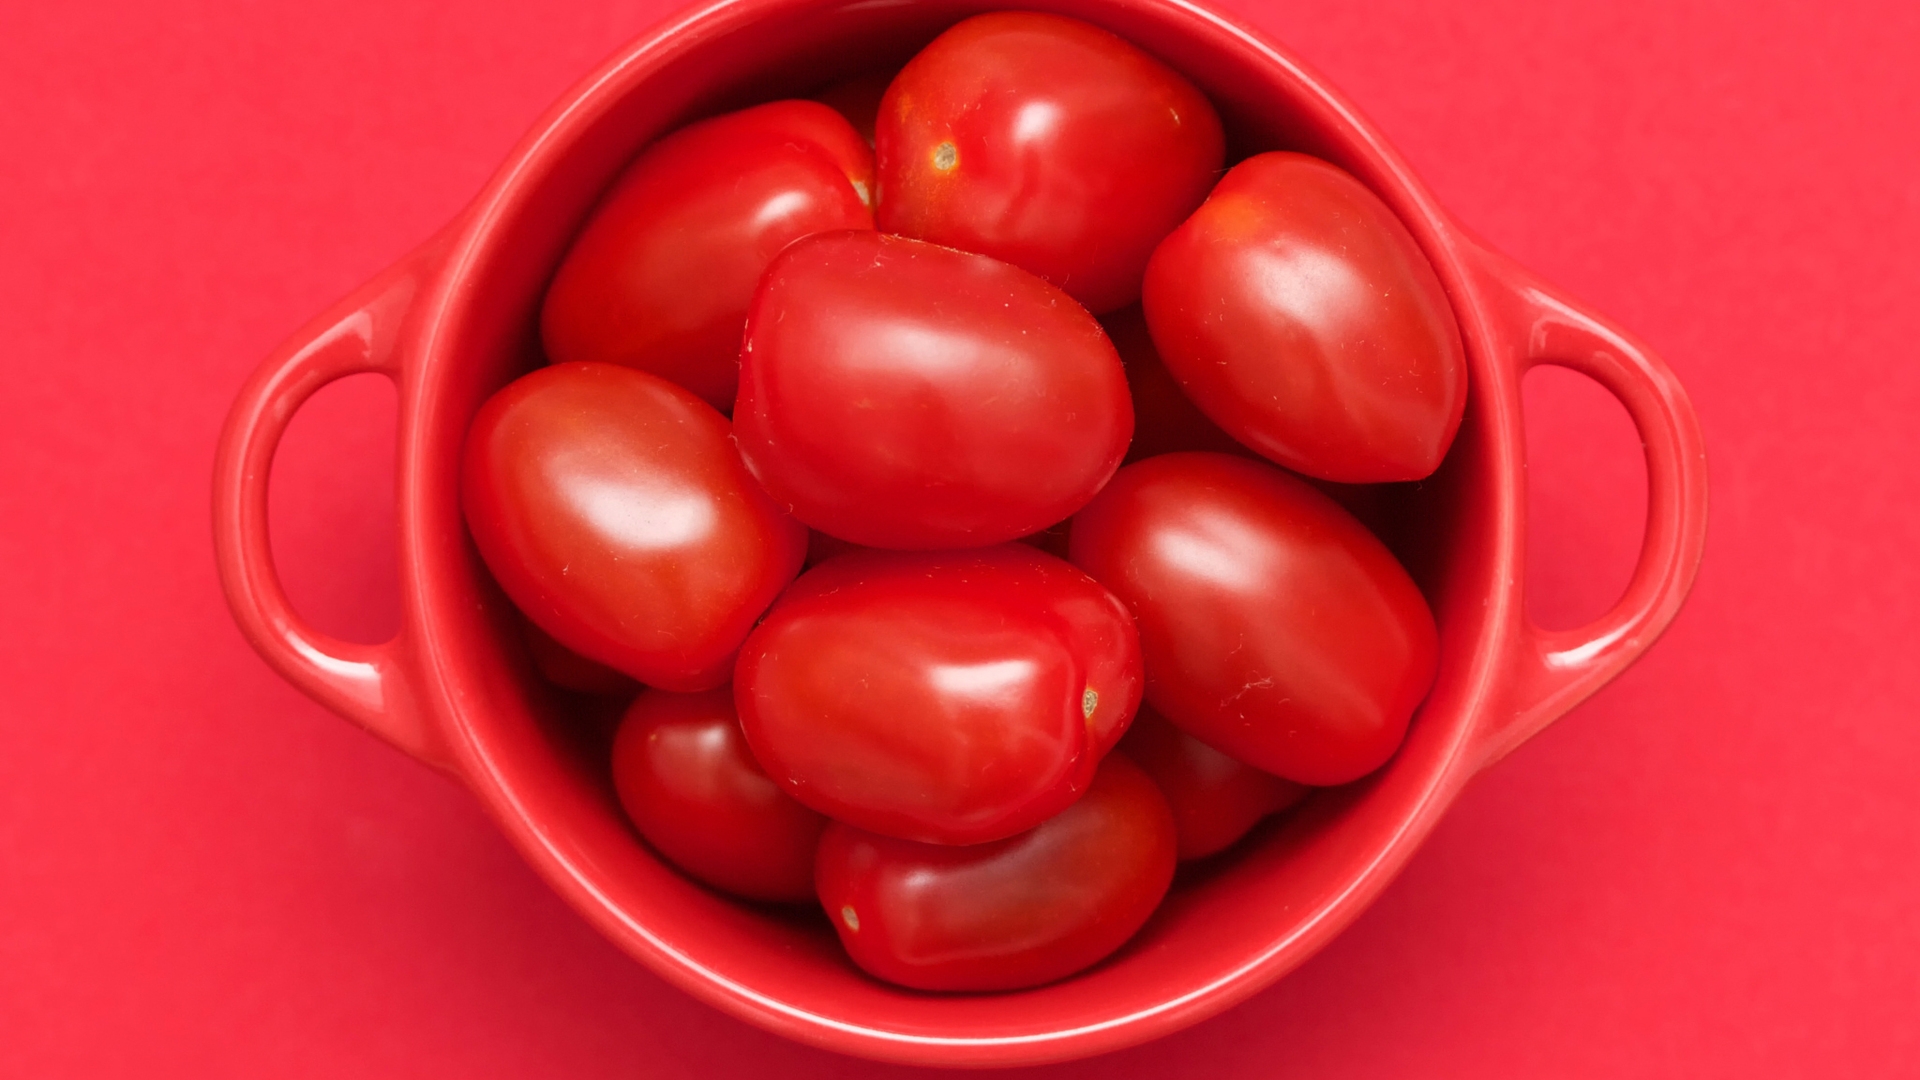 Red Tomatoes for 1920 x 1080 HDTV 1080p resolution